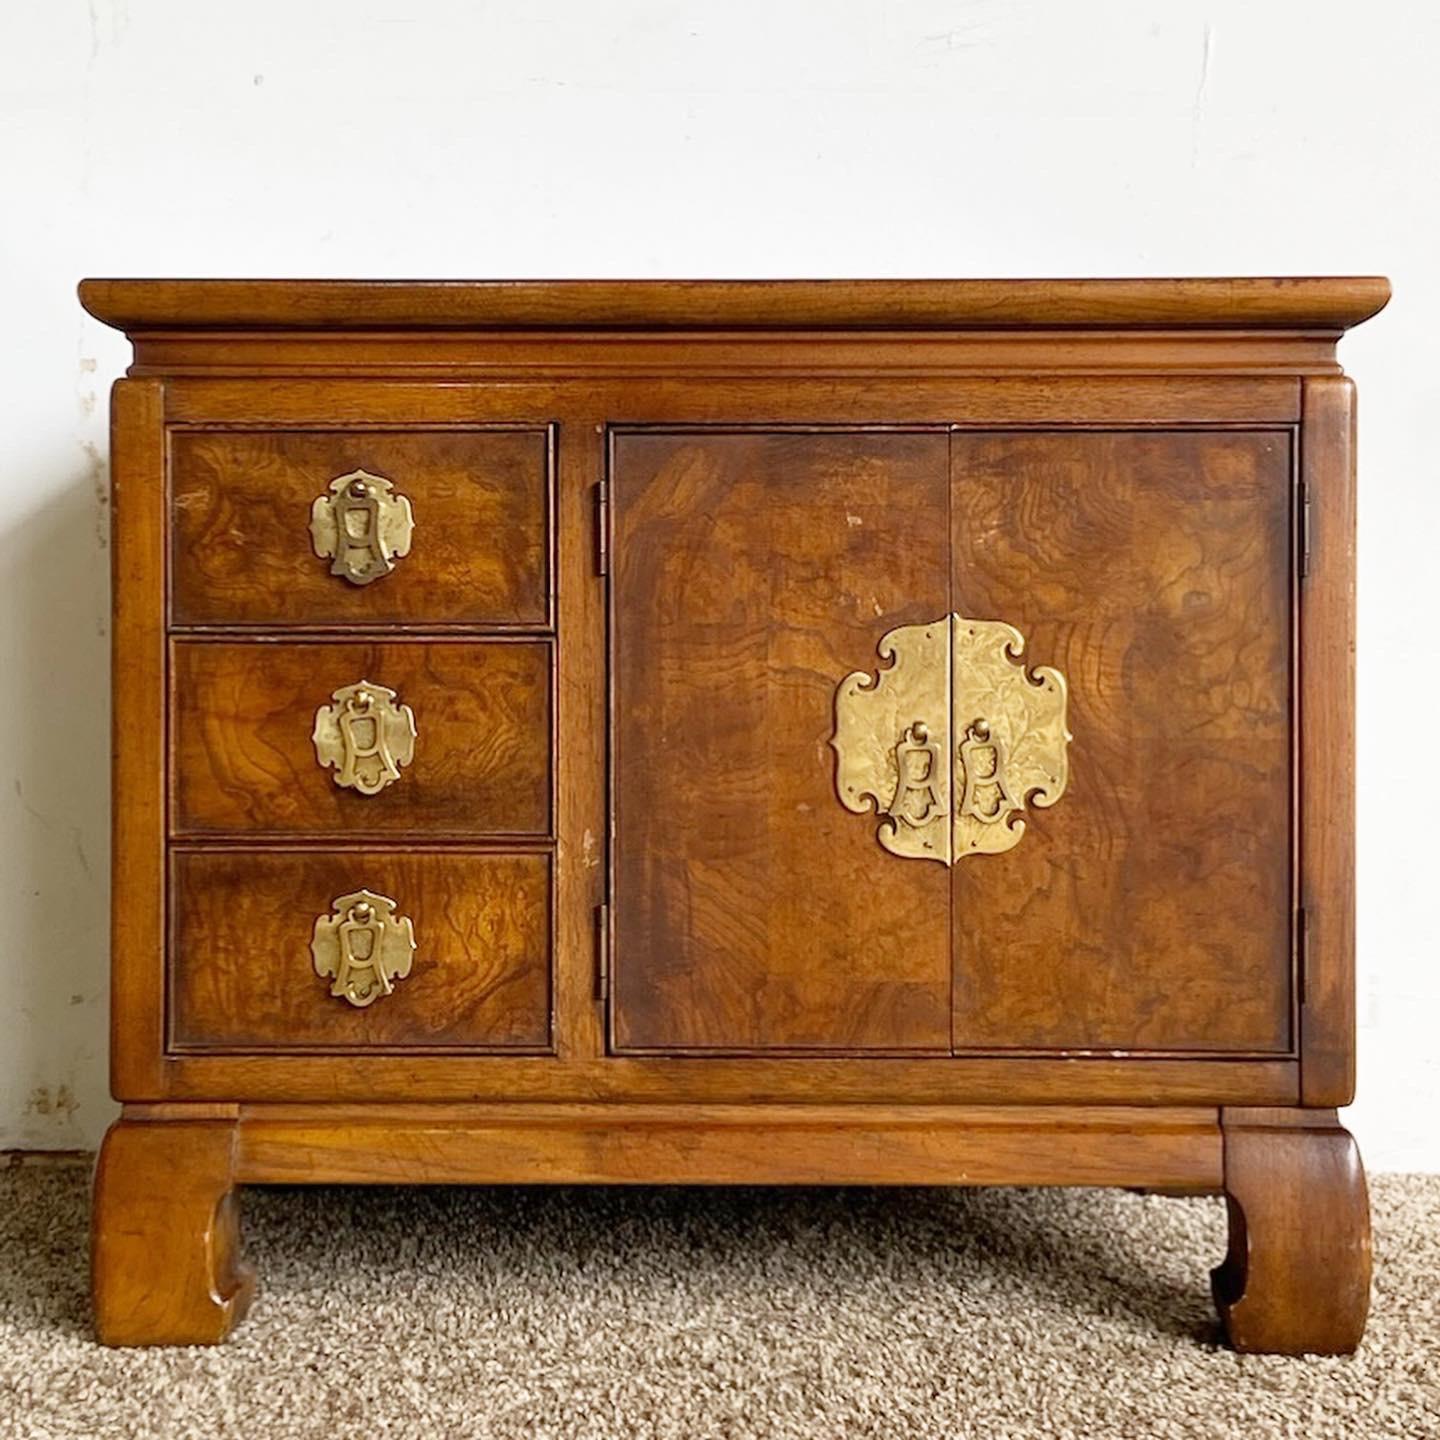 Introducing this Chinoiserie Burlwood Brass Nightstand by Gordon‚Äôs Furniture, a vintage treasure that brings classic asian flair to your bedroom. Crafted from burlwood and accented with brass elements, this nightstand is a stunning combination of